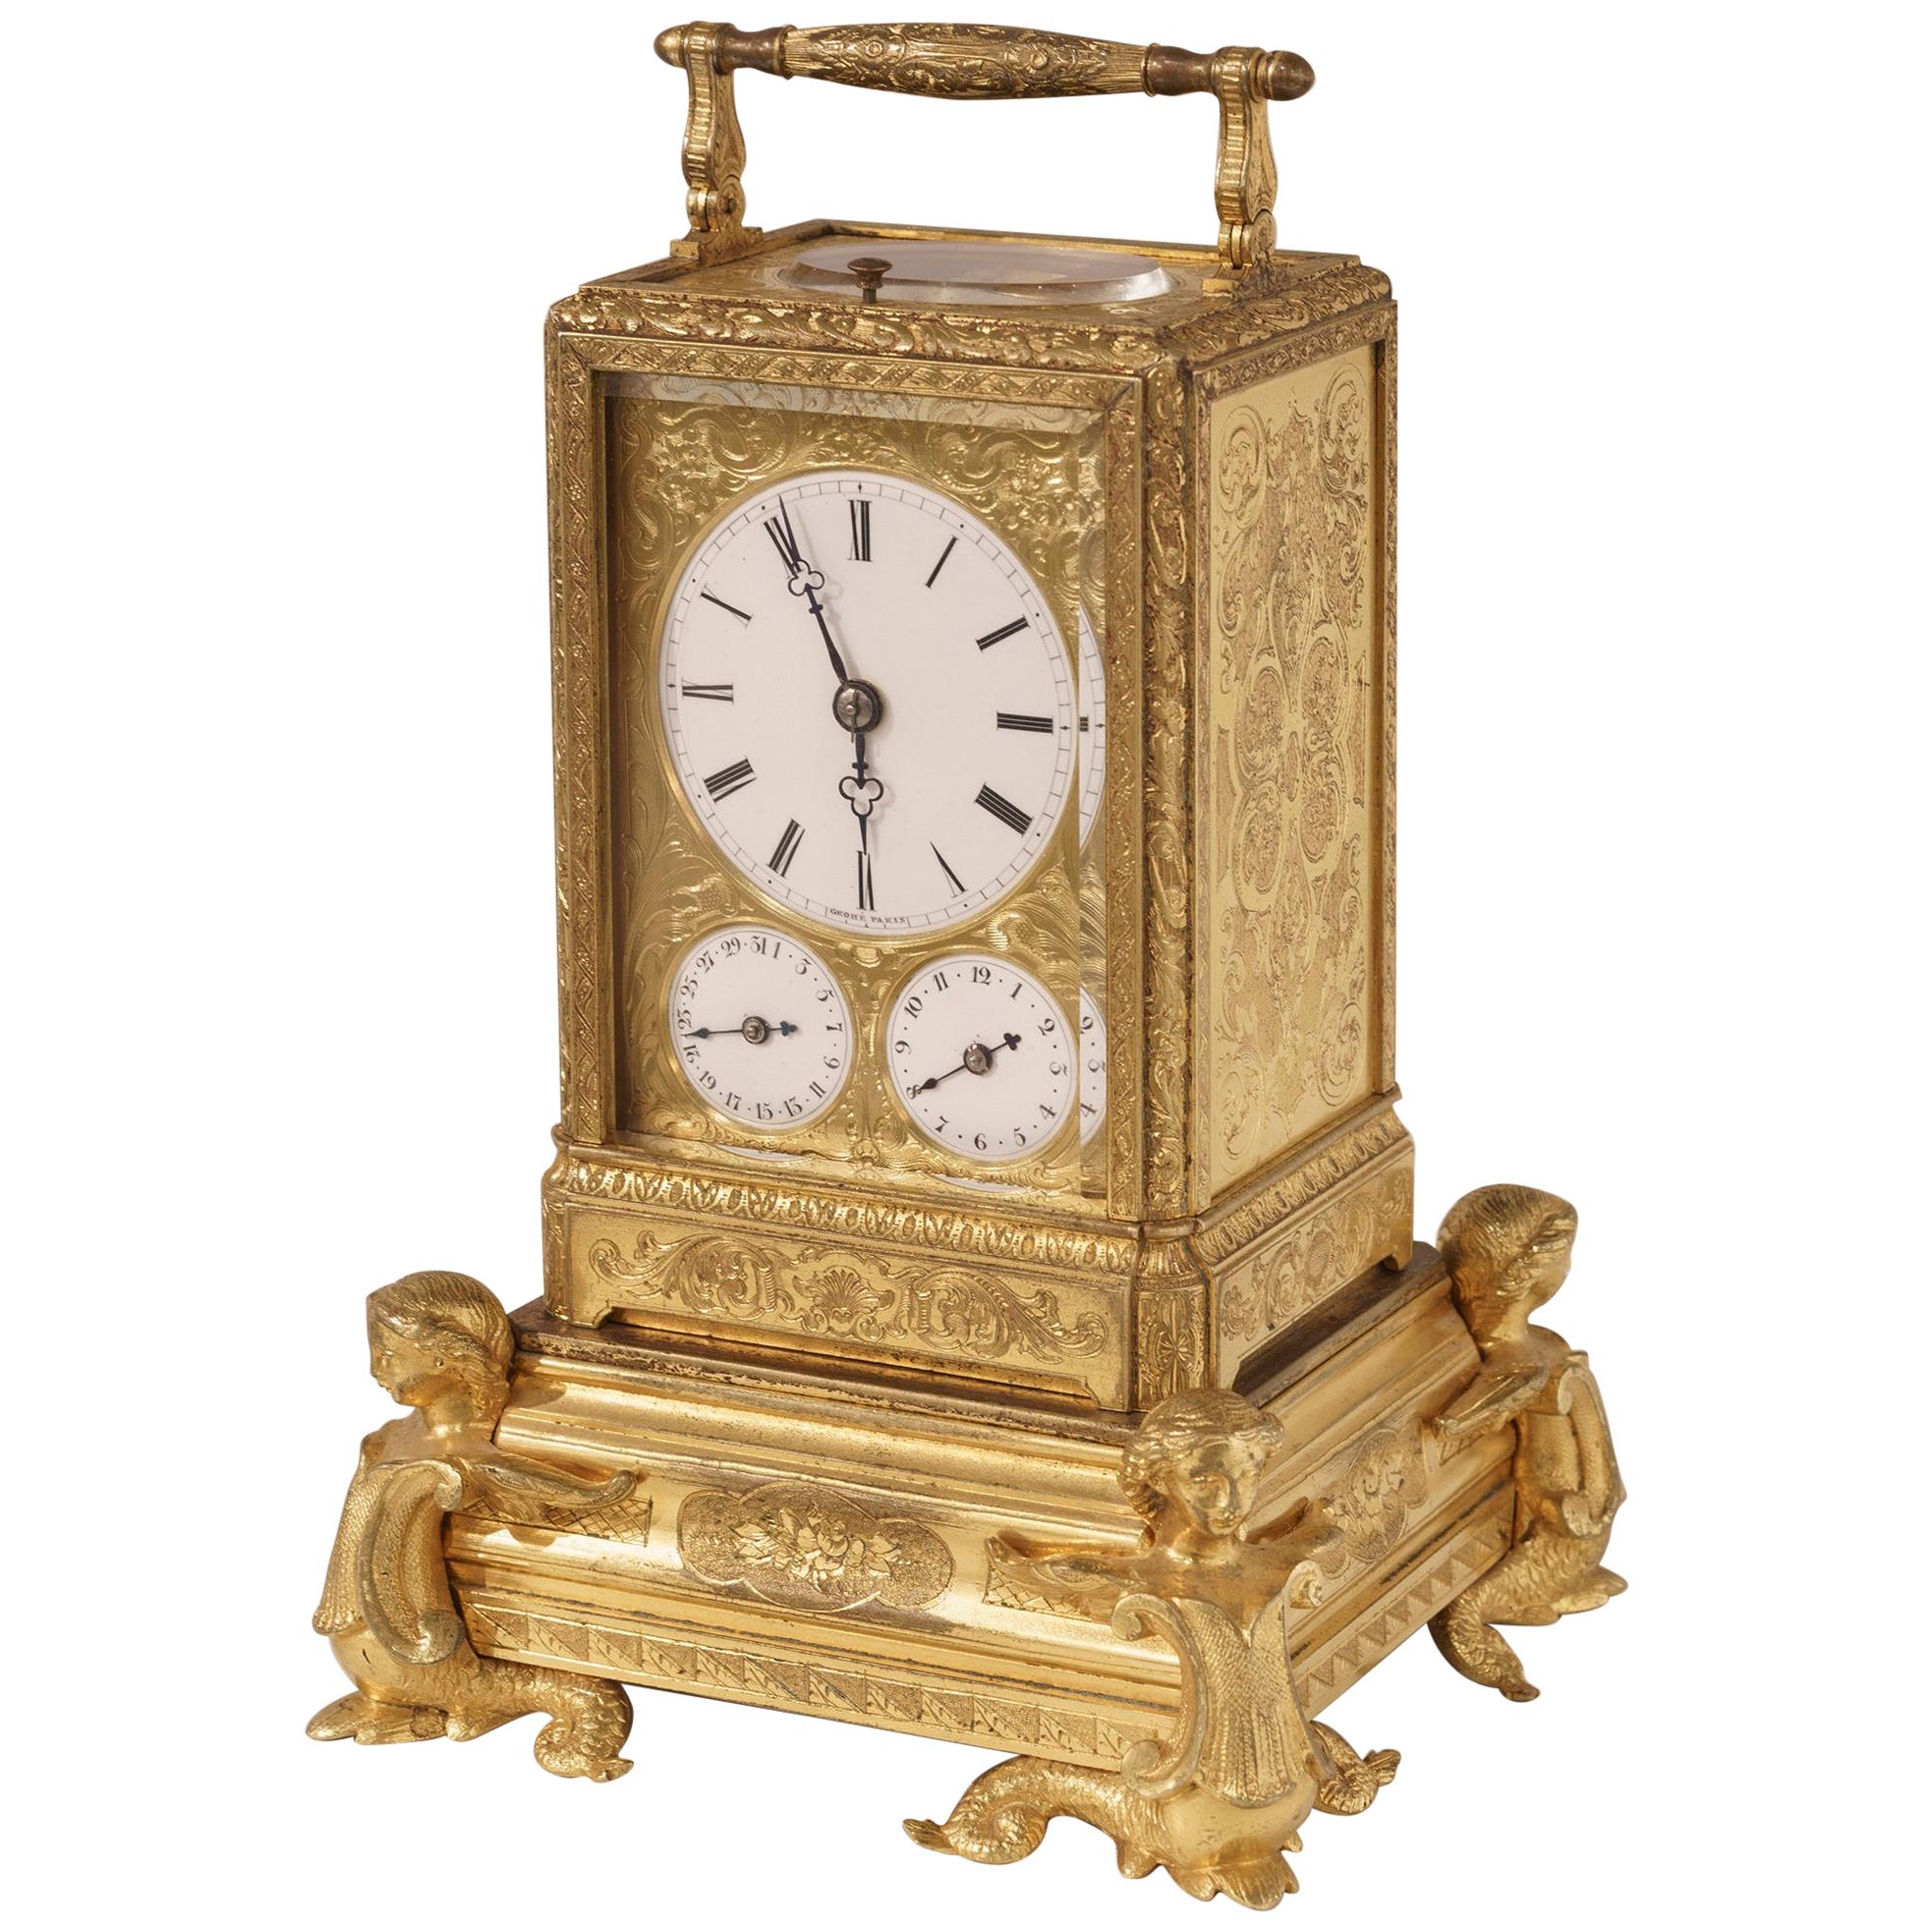 19th Century French Petite Sonnerie Ormolu Carriage Clock by Grohé with Calendar For Sale